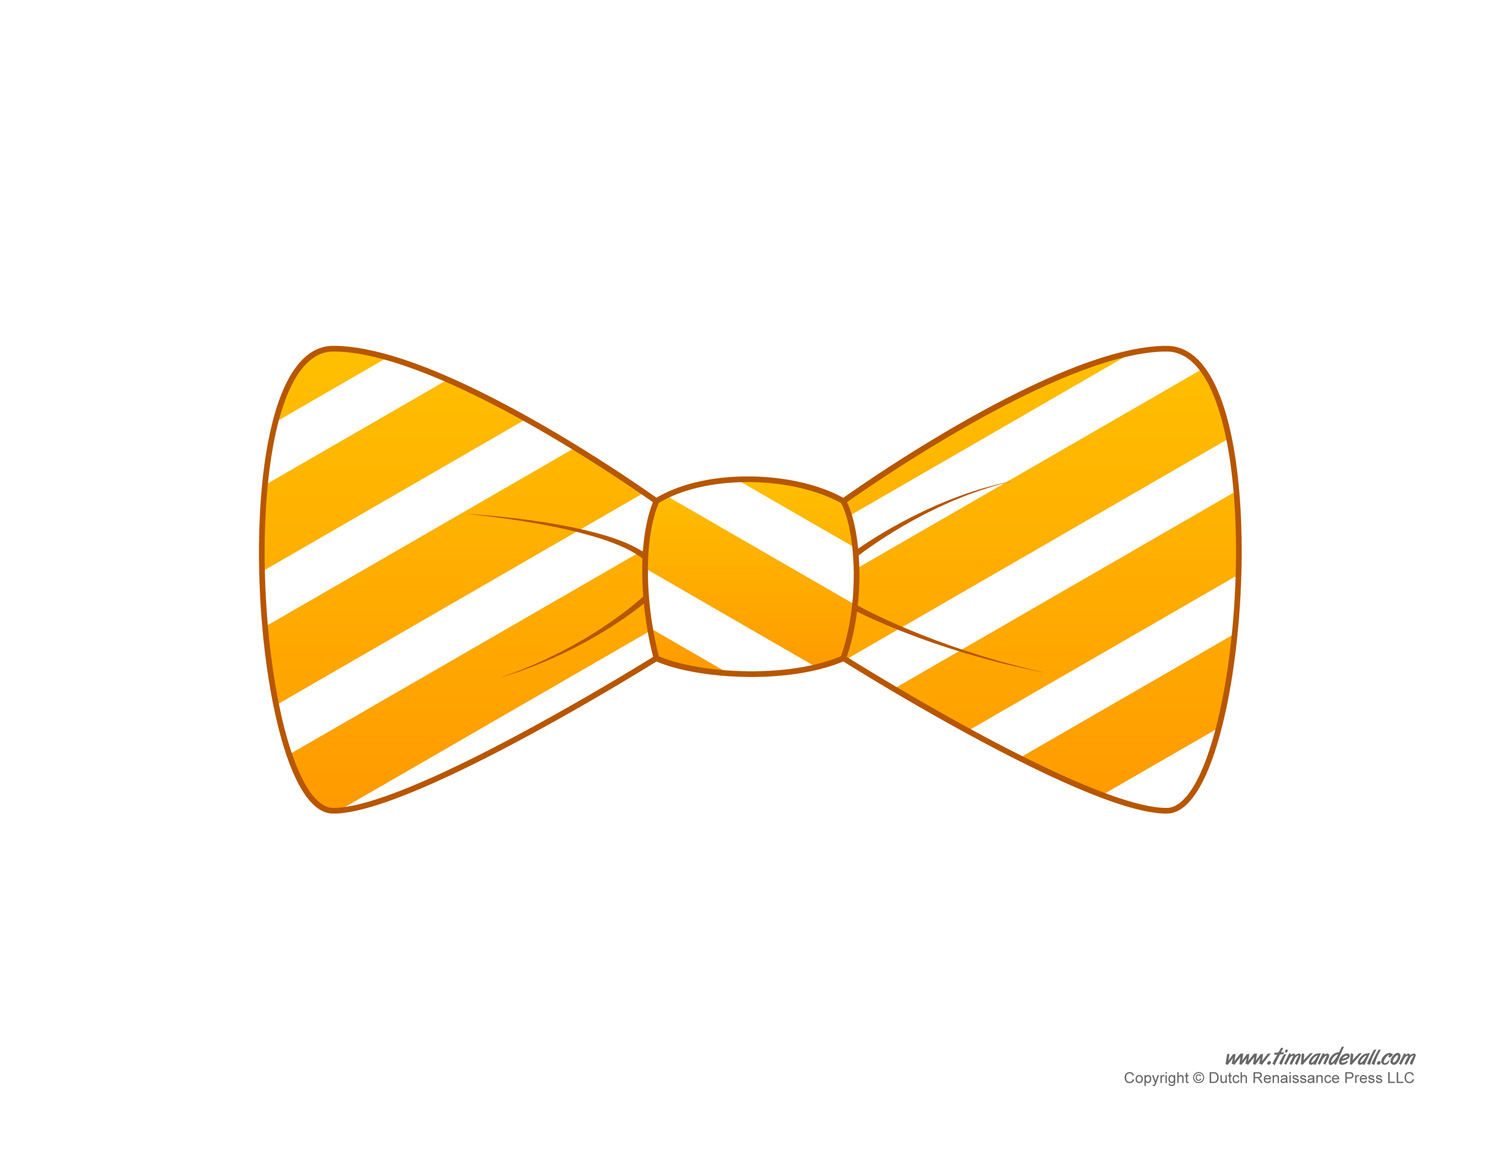 Free Bow Tie Clipart, Download Free Clip Art, Free Clip Art.